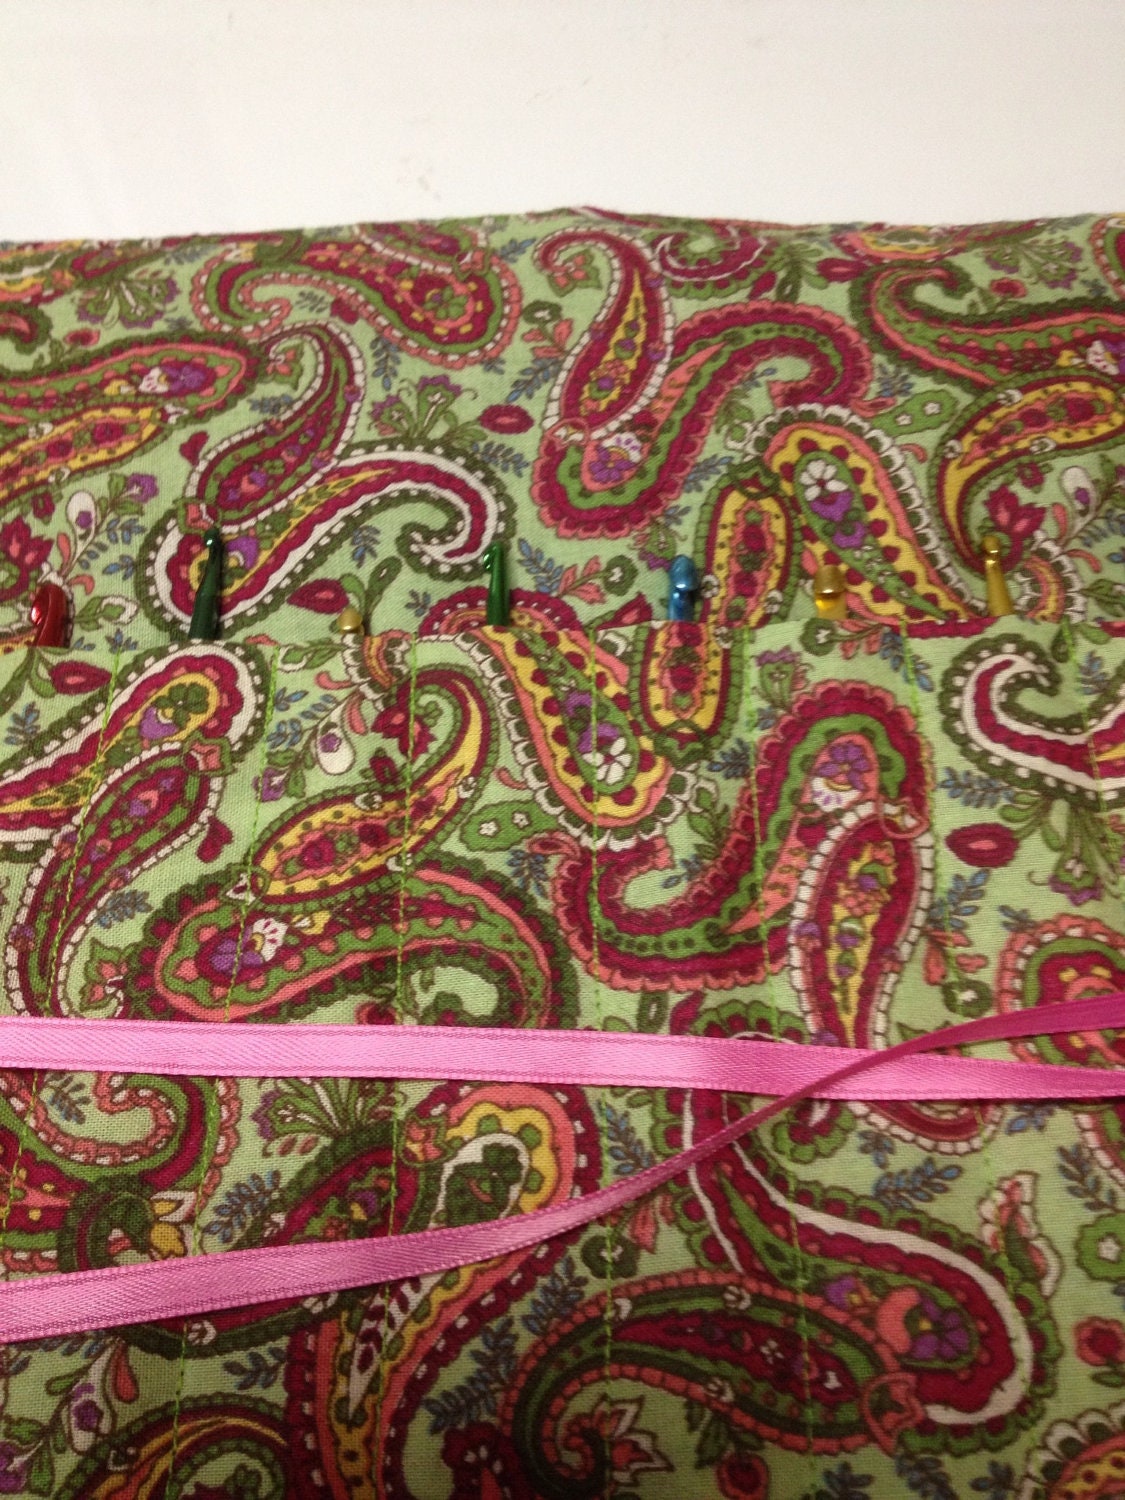 Crochet Hook Case Organizer Holder  Holds 12 Needle Olive Green Pink Paisley Print Light Weight  Keeps all your needles together